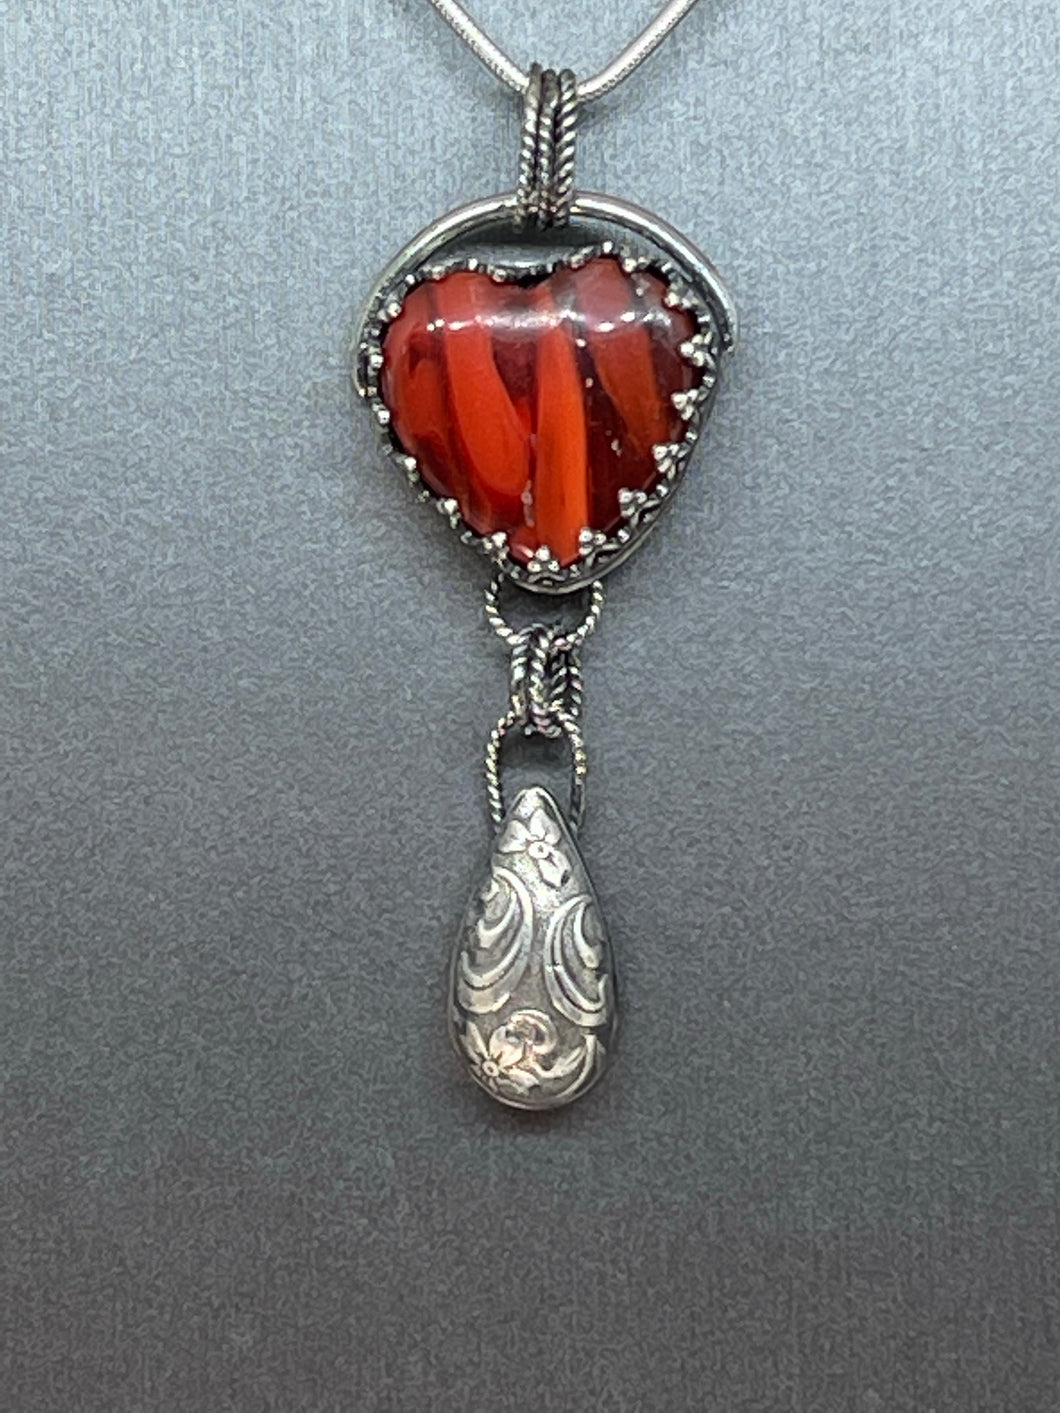 Fine Silver Pendant with Heart Shaped Red and Black Rosarita